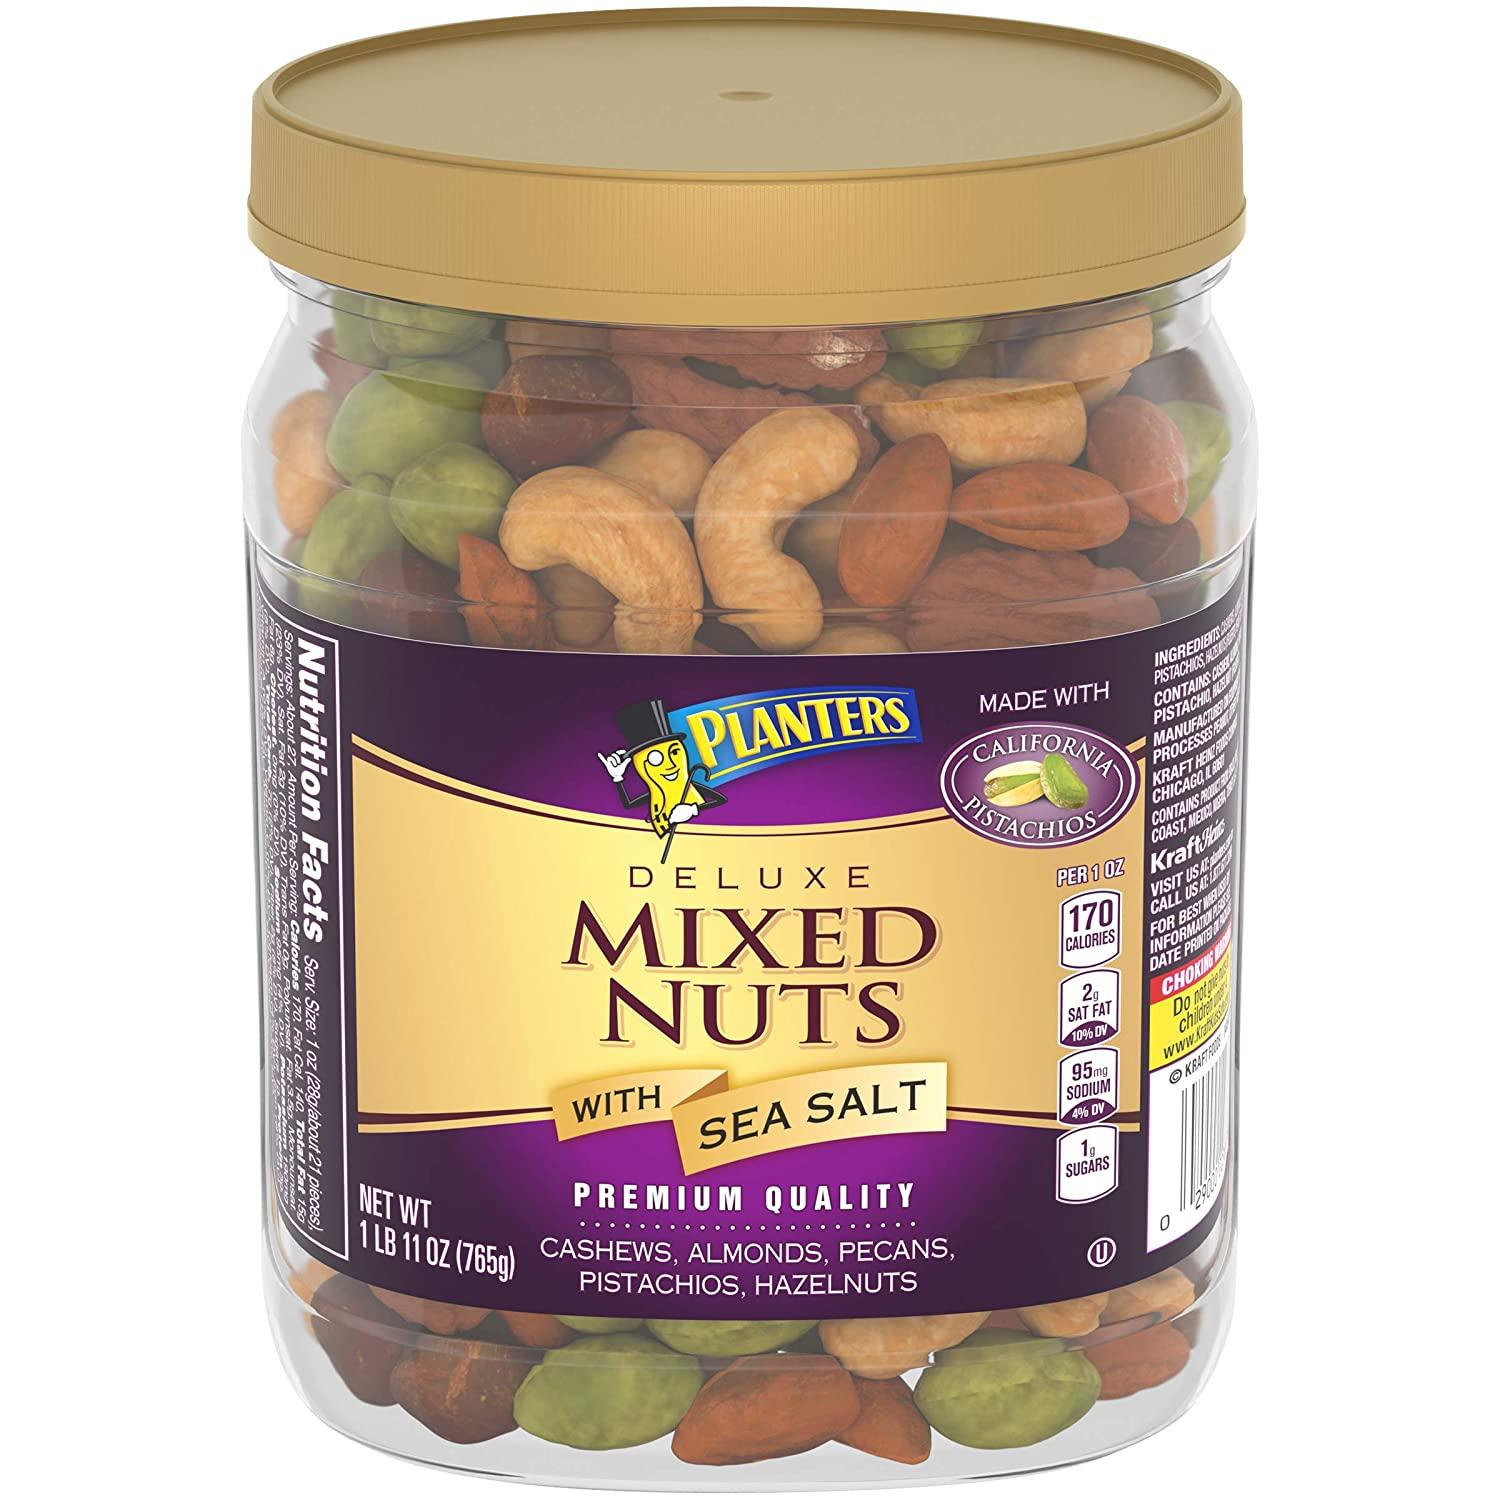 Planters Deluxe Mixed Nuts with Sea Salt for $11.24 Shipped